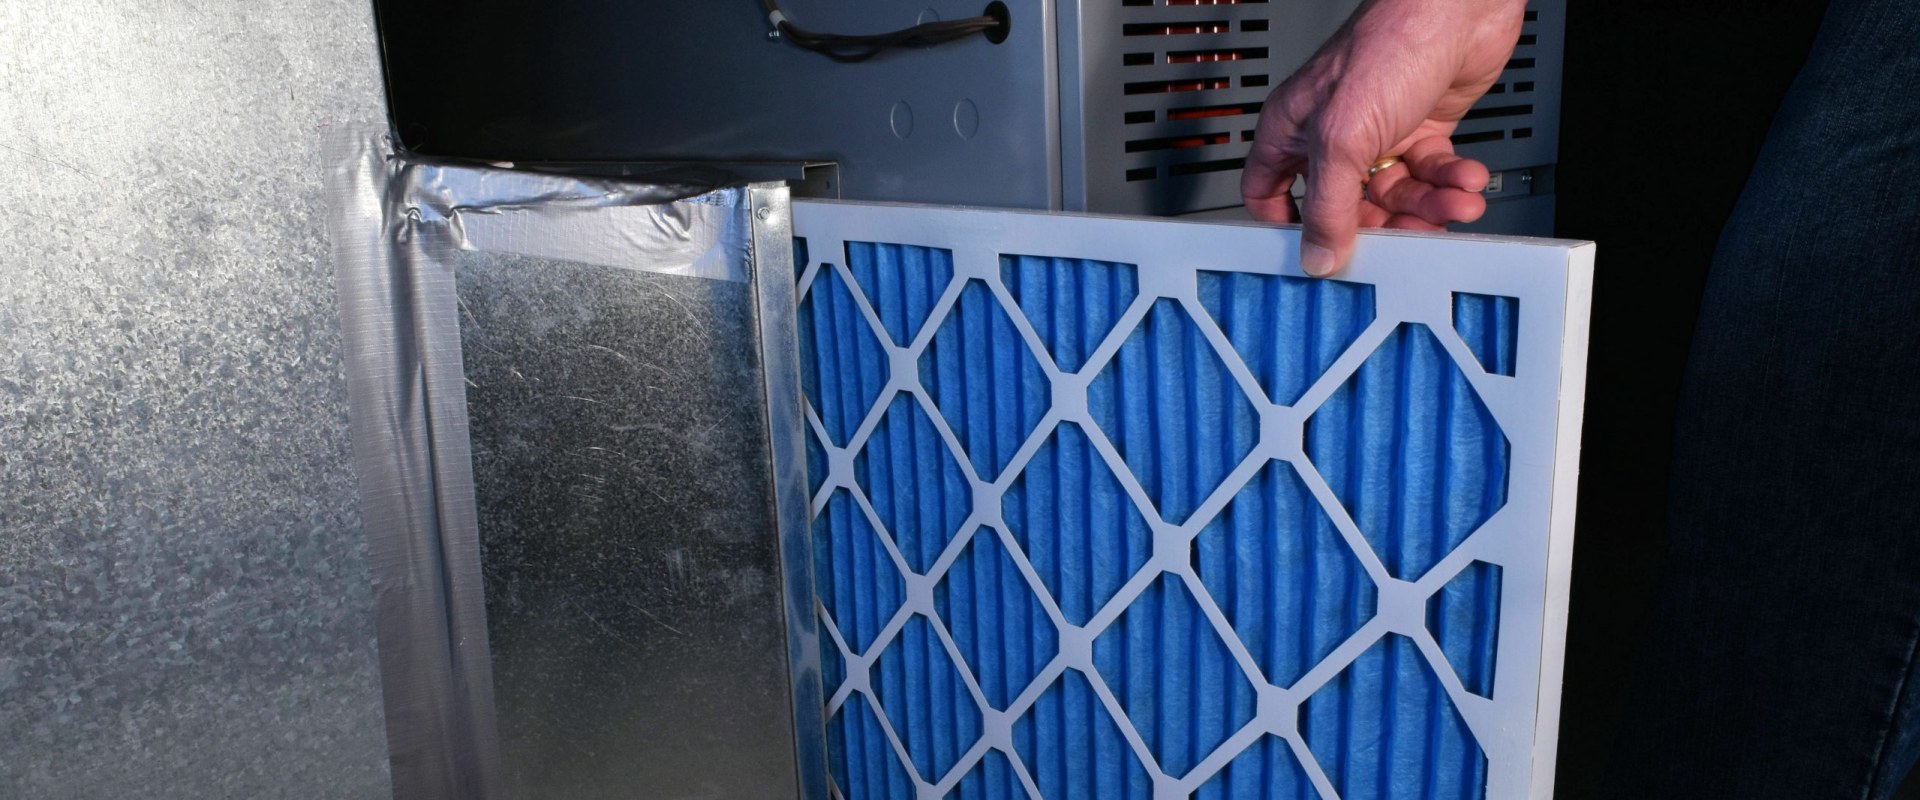 How to Clean Your Air Filter 20x25x4 Easily and Effectively